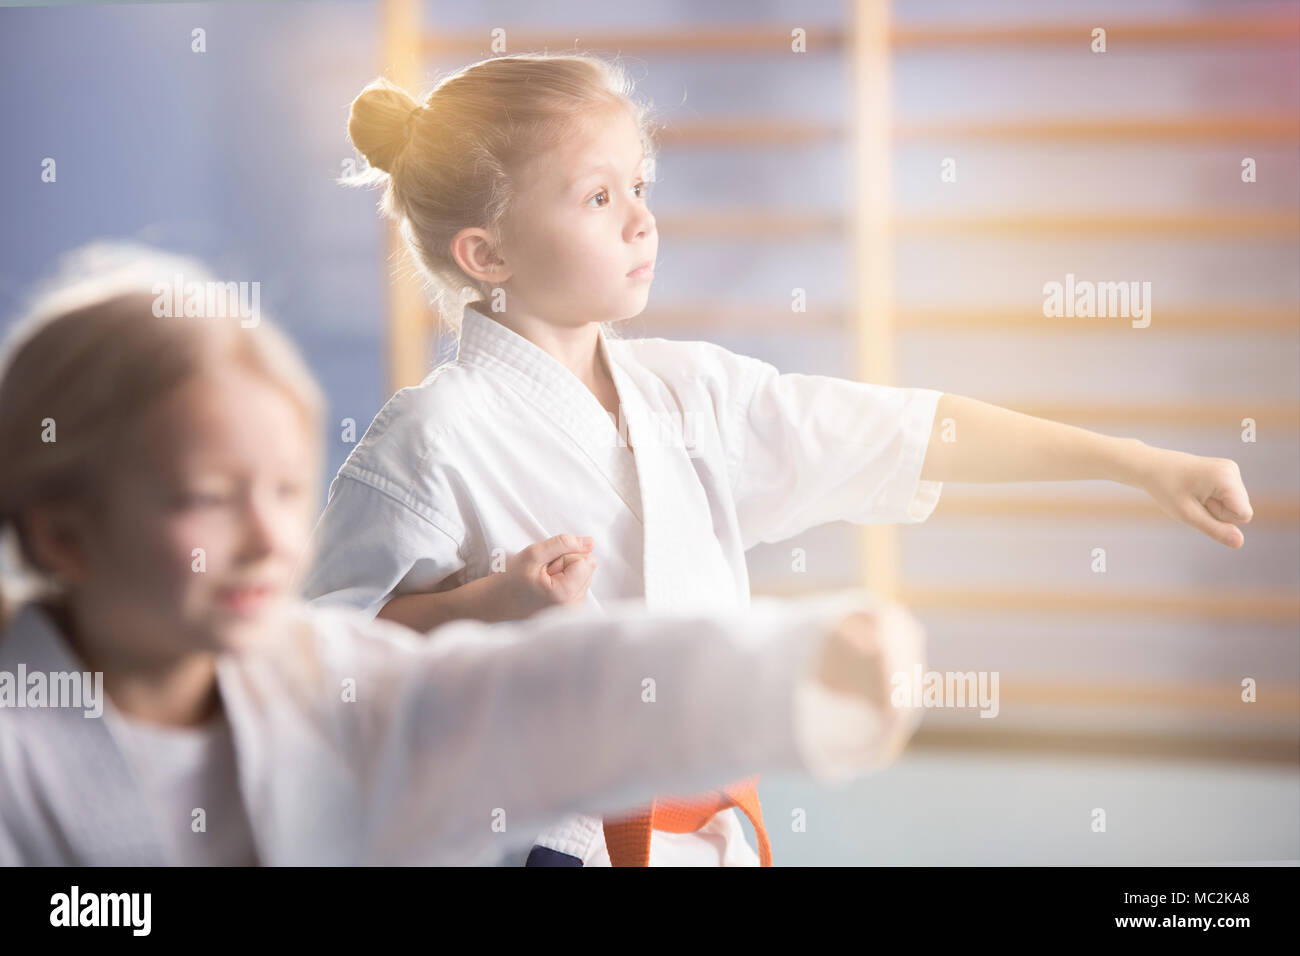 Girl in white kimono practicing karate during extra-curricular class at school Stock Photo